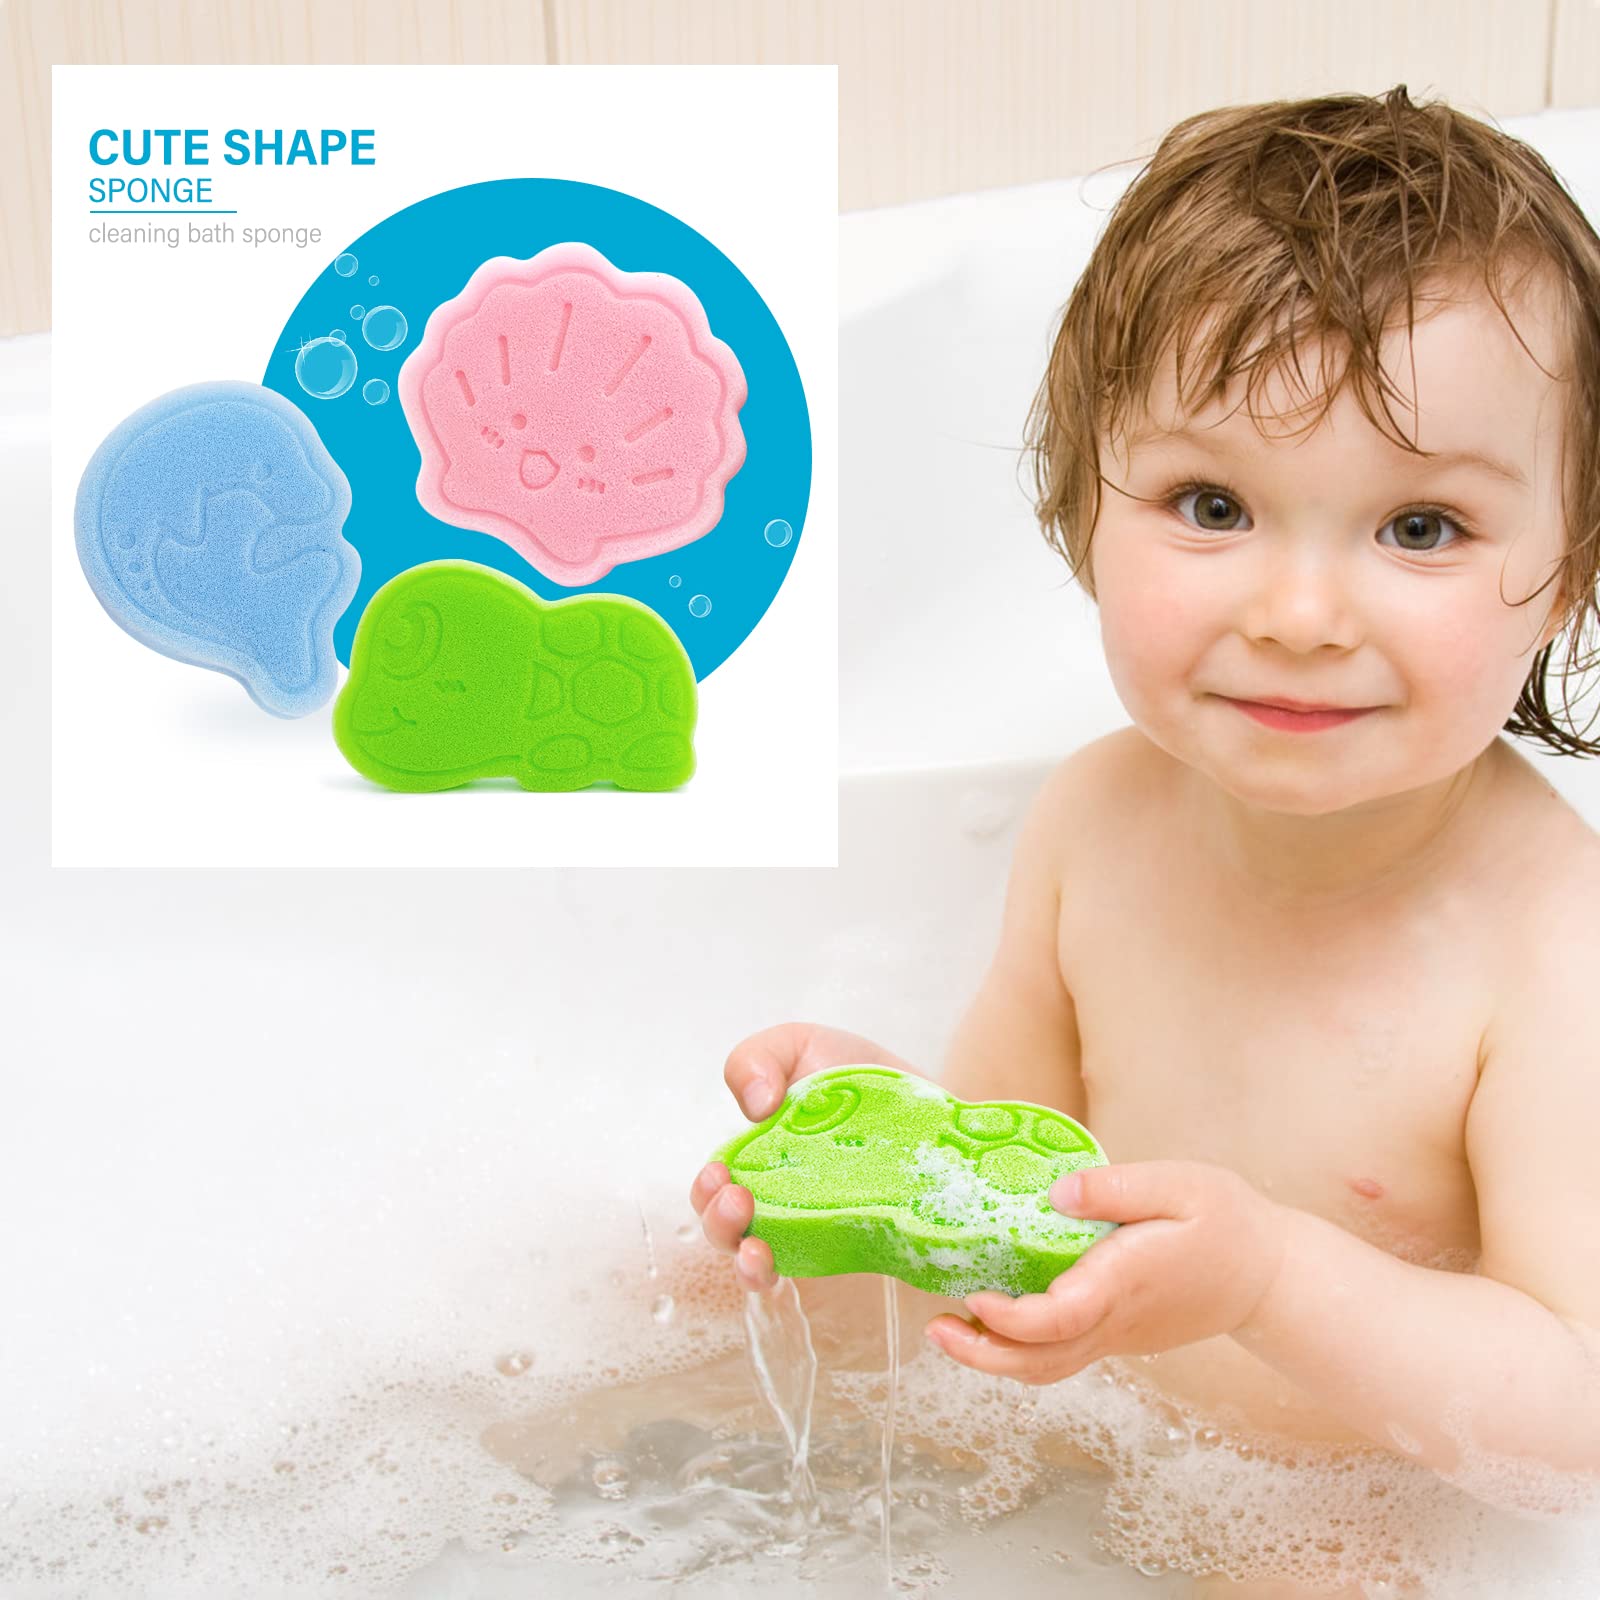 DANCELF Baby Bath Sponge, Natural Cute Shapes Soft Shower Sponges for Bathing, Bathtub Toys for Infants and Toddler, 3pcs : Blue Dolphin, Pink Shell, Green Turtle